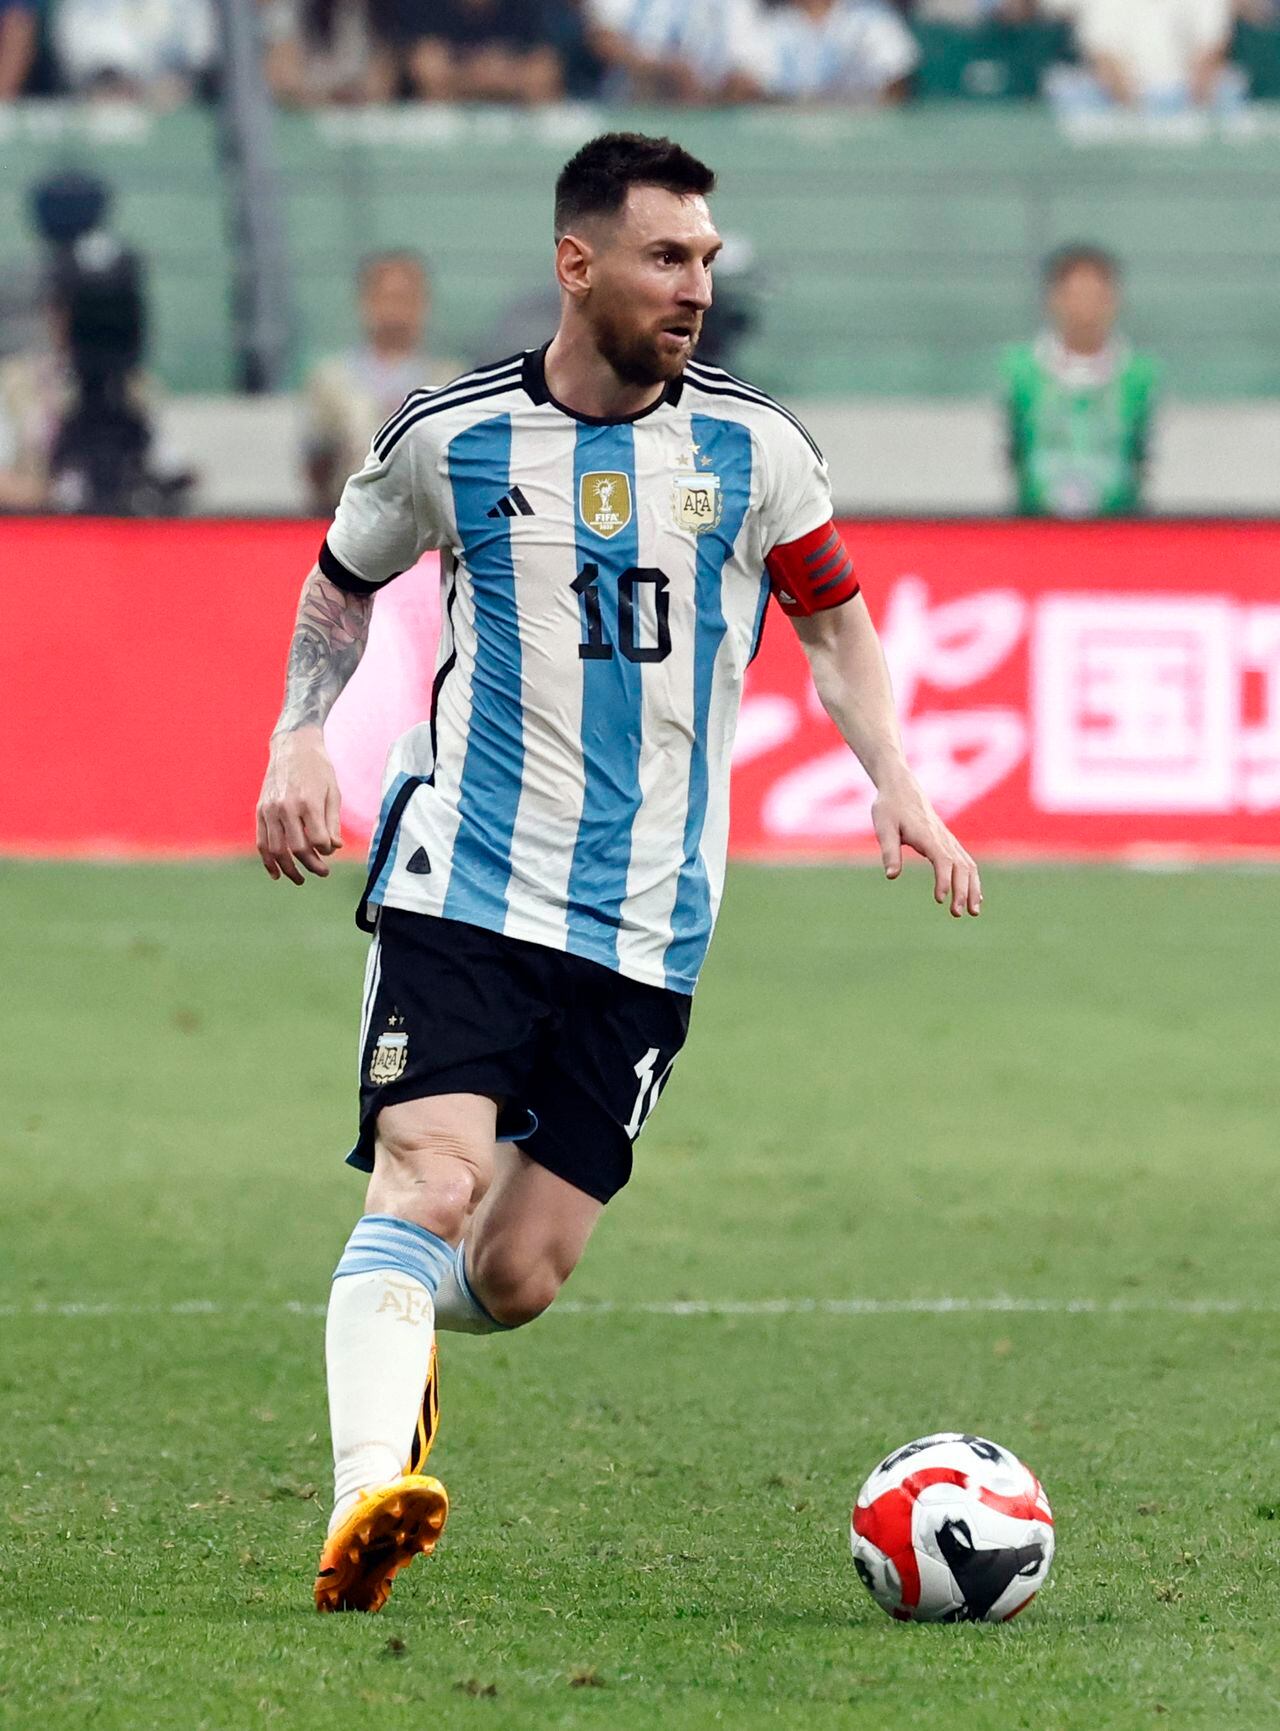 Soccer Football - Friendly - Argentina v Australia - Workers' Stadium, Beijing, China - June 15, 2023 Argentina's Lionel Messi in action REUTERS/Thomas Peter